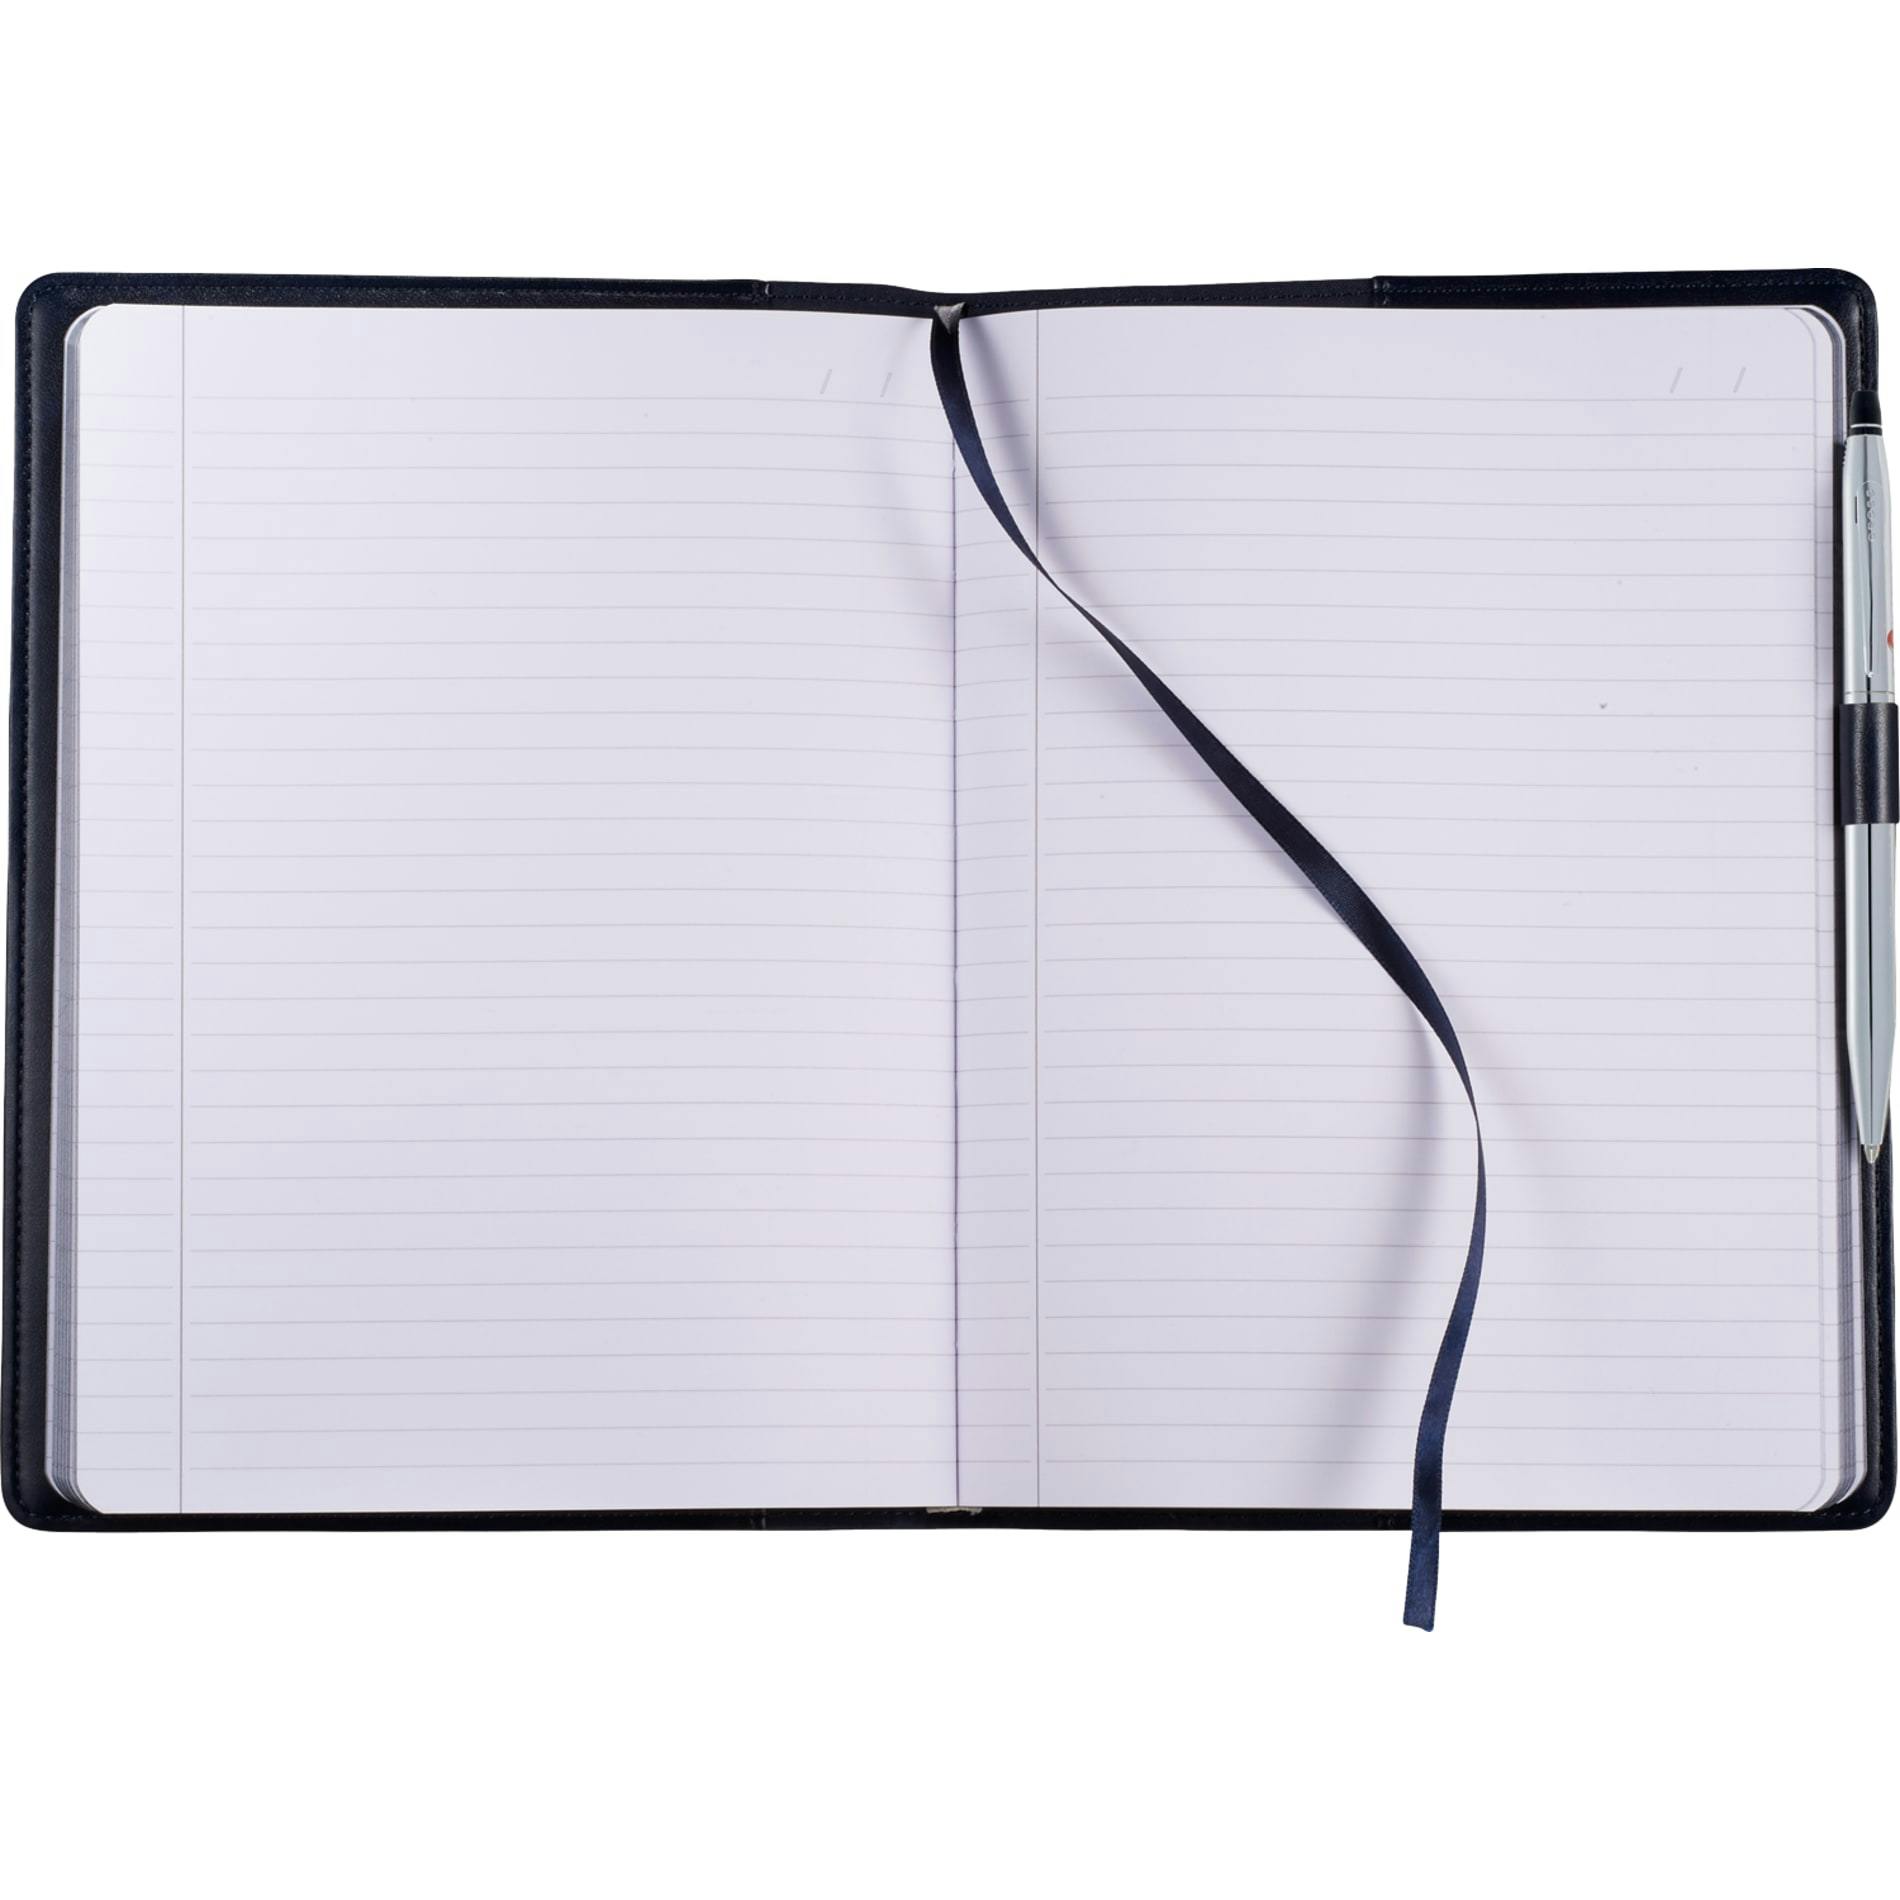 Cross® Classic Refillable Notebook - additional Image 2